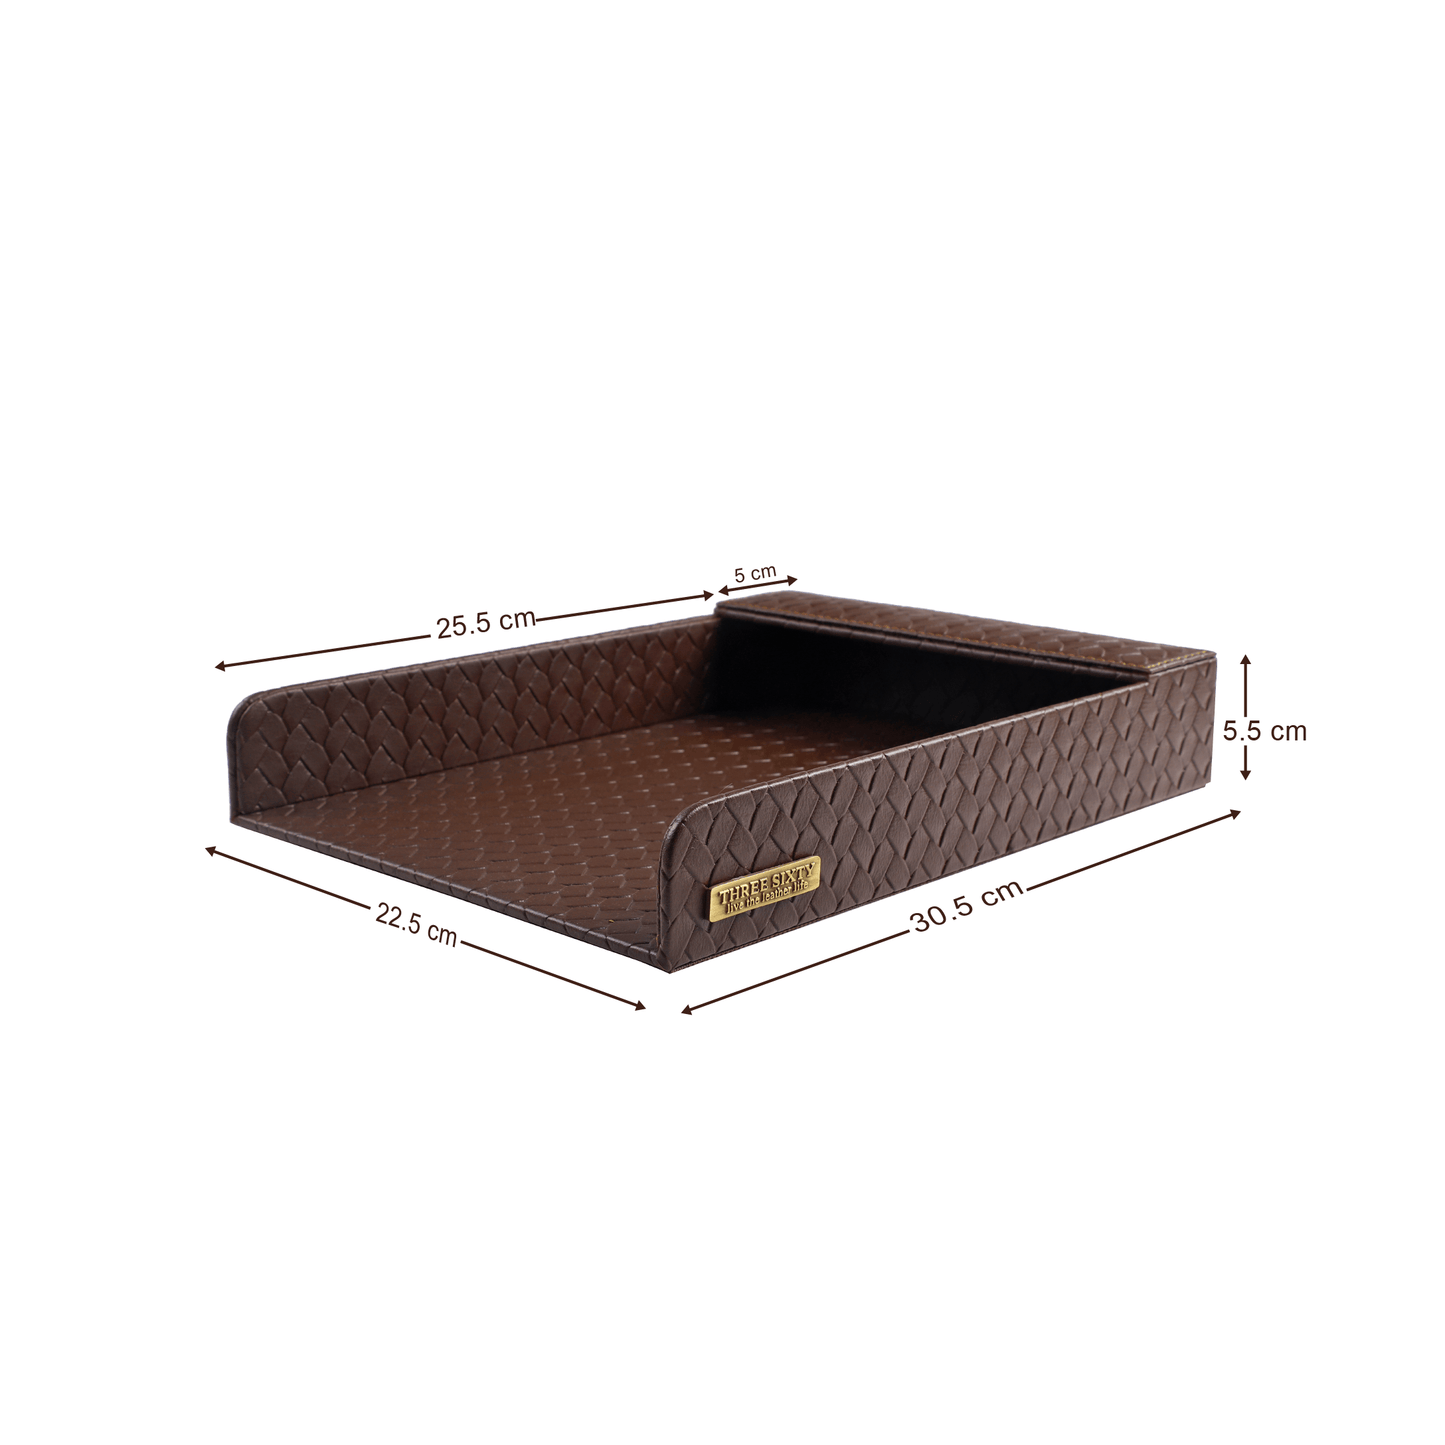 Paper Tray A4 in Faux Leather Brown